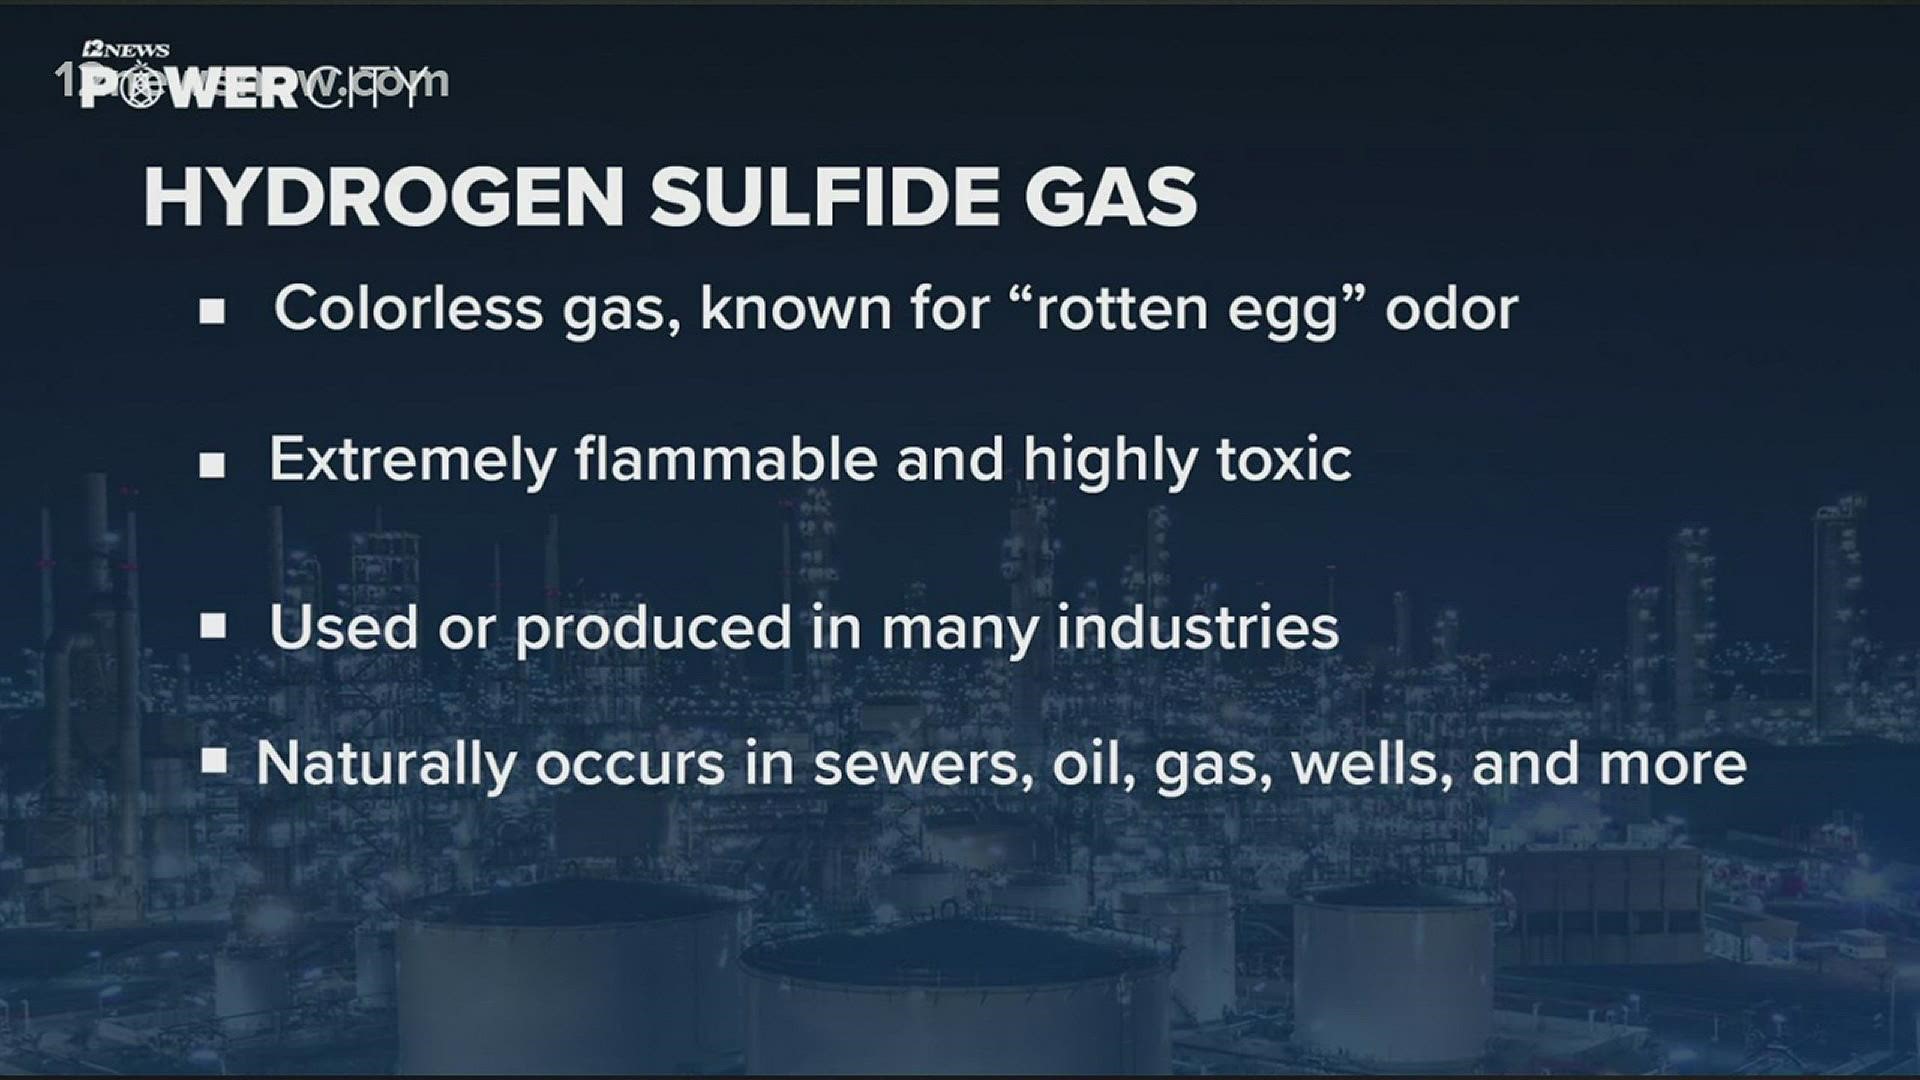 The leaking product from the trailer is releasing a small amount of hydrogen sulfide gas, which is known for its "rotten egg" smell.